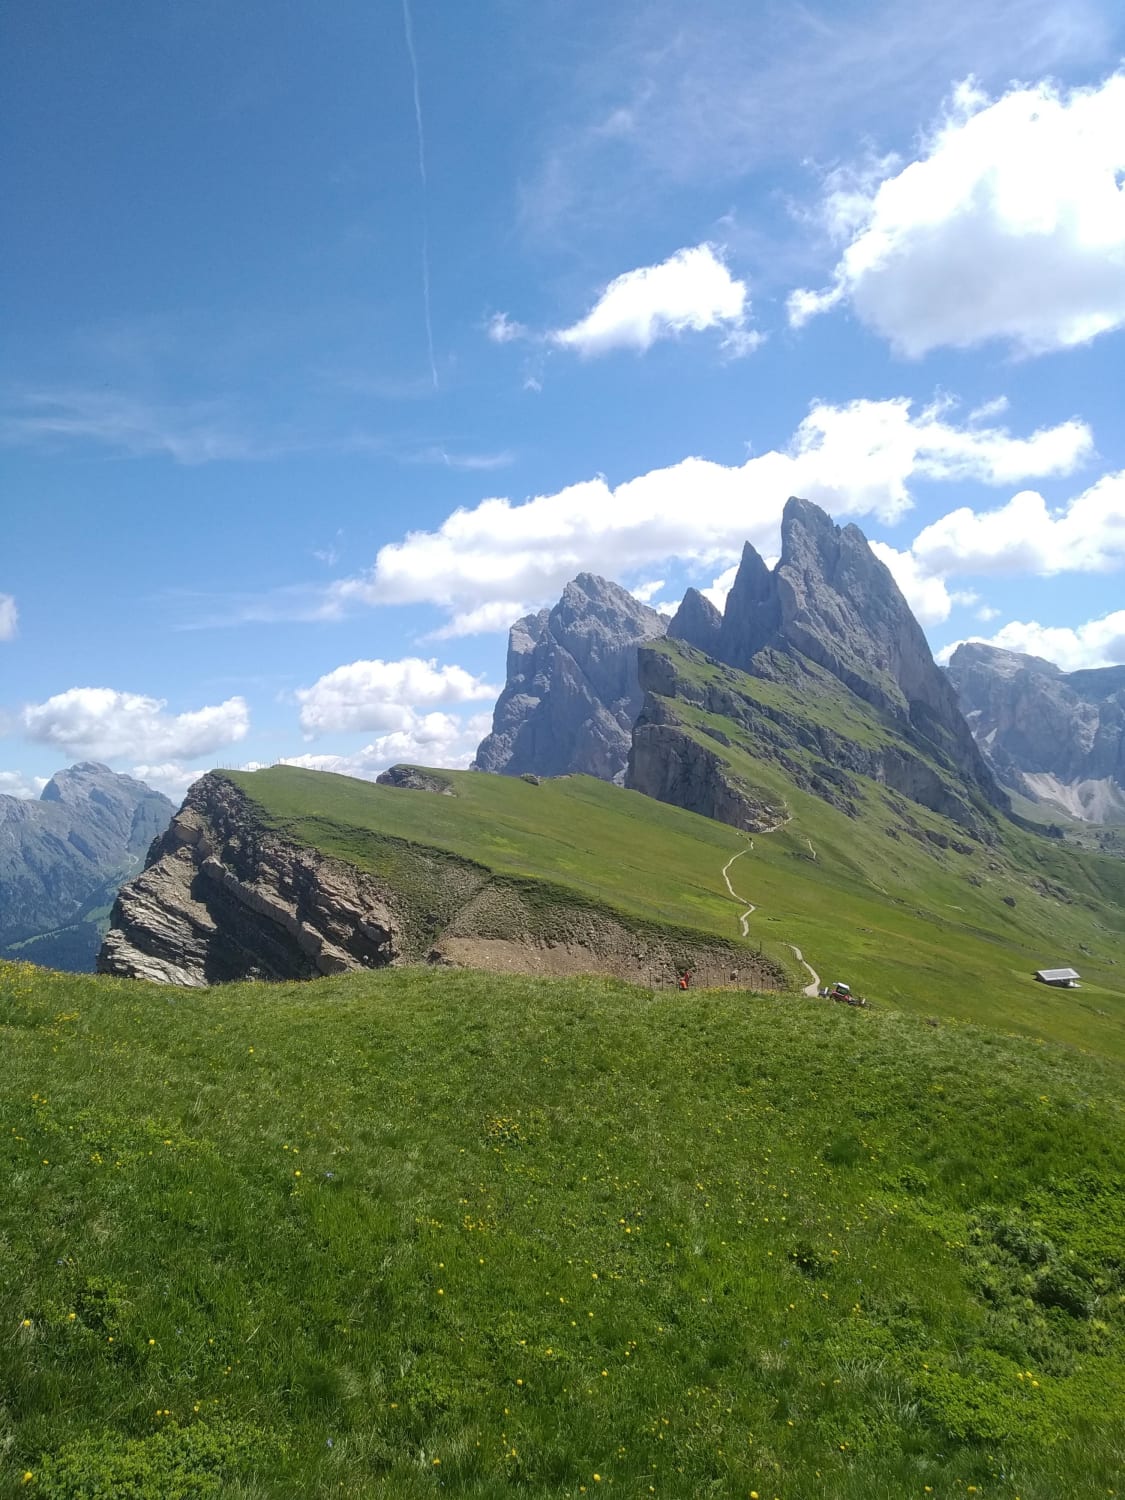 Today I went to Seceda (Italy)! Beautiful place. 10/10